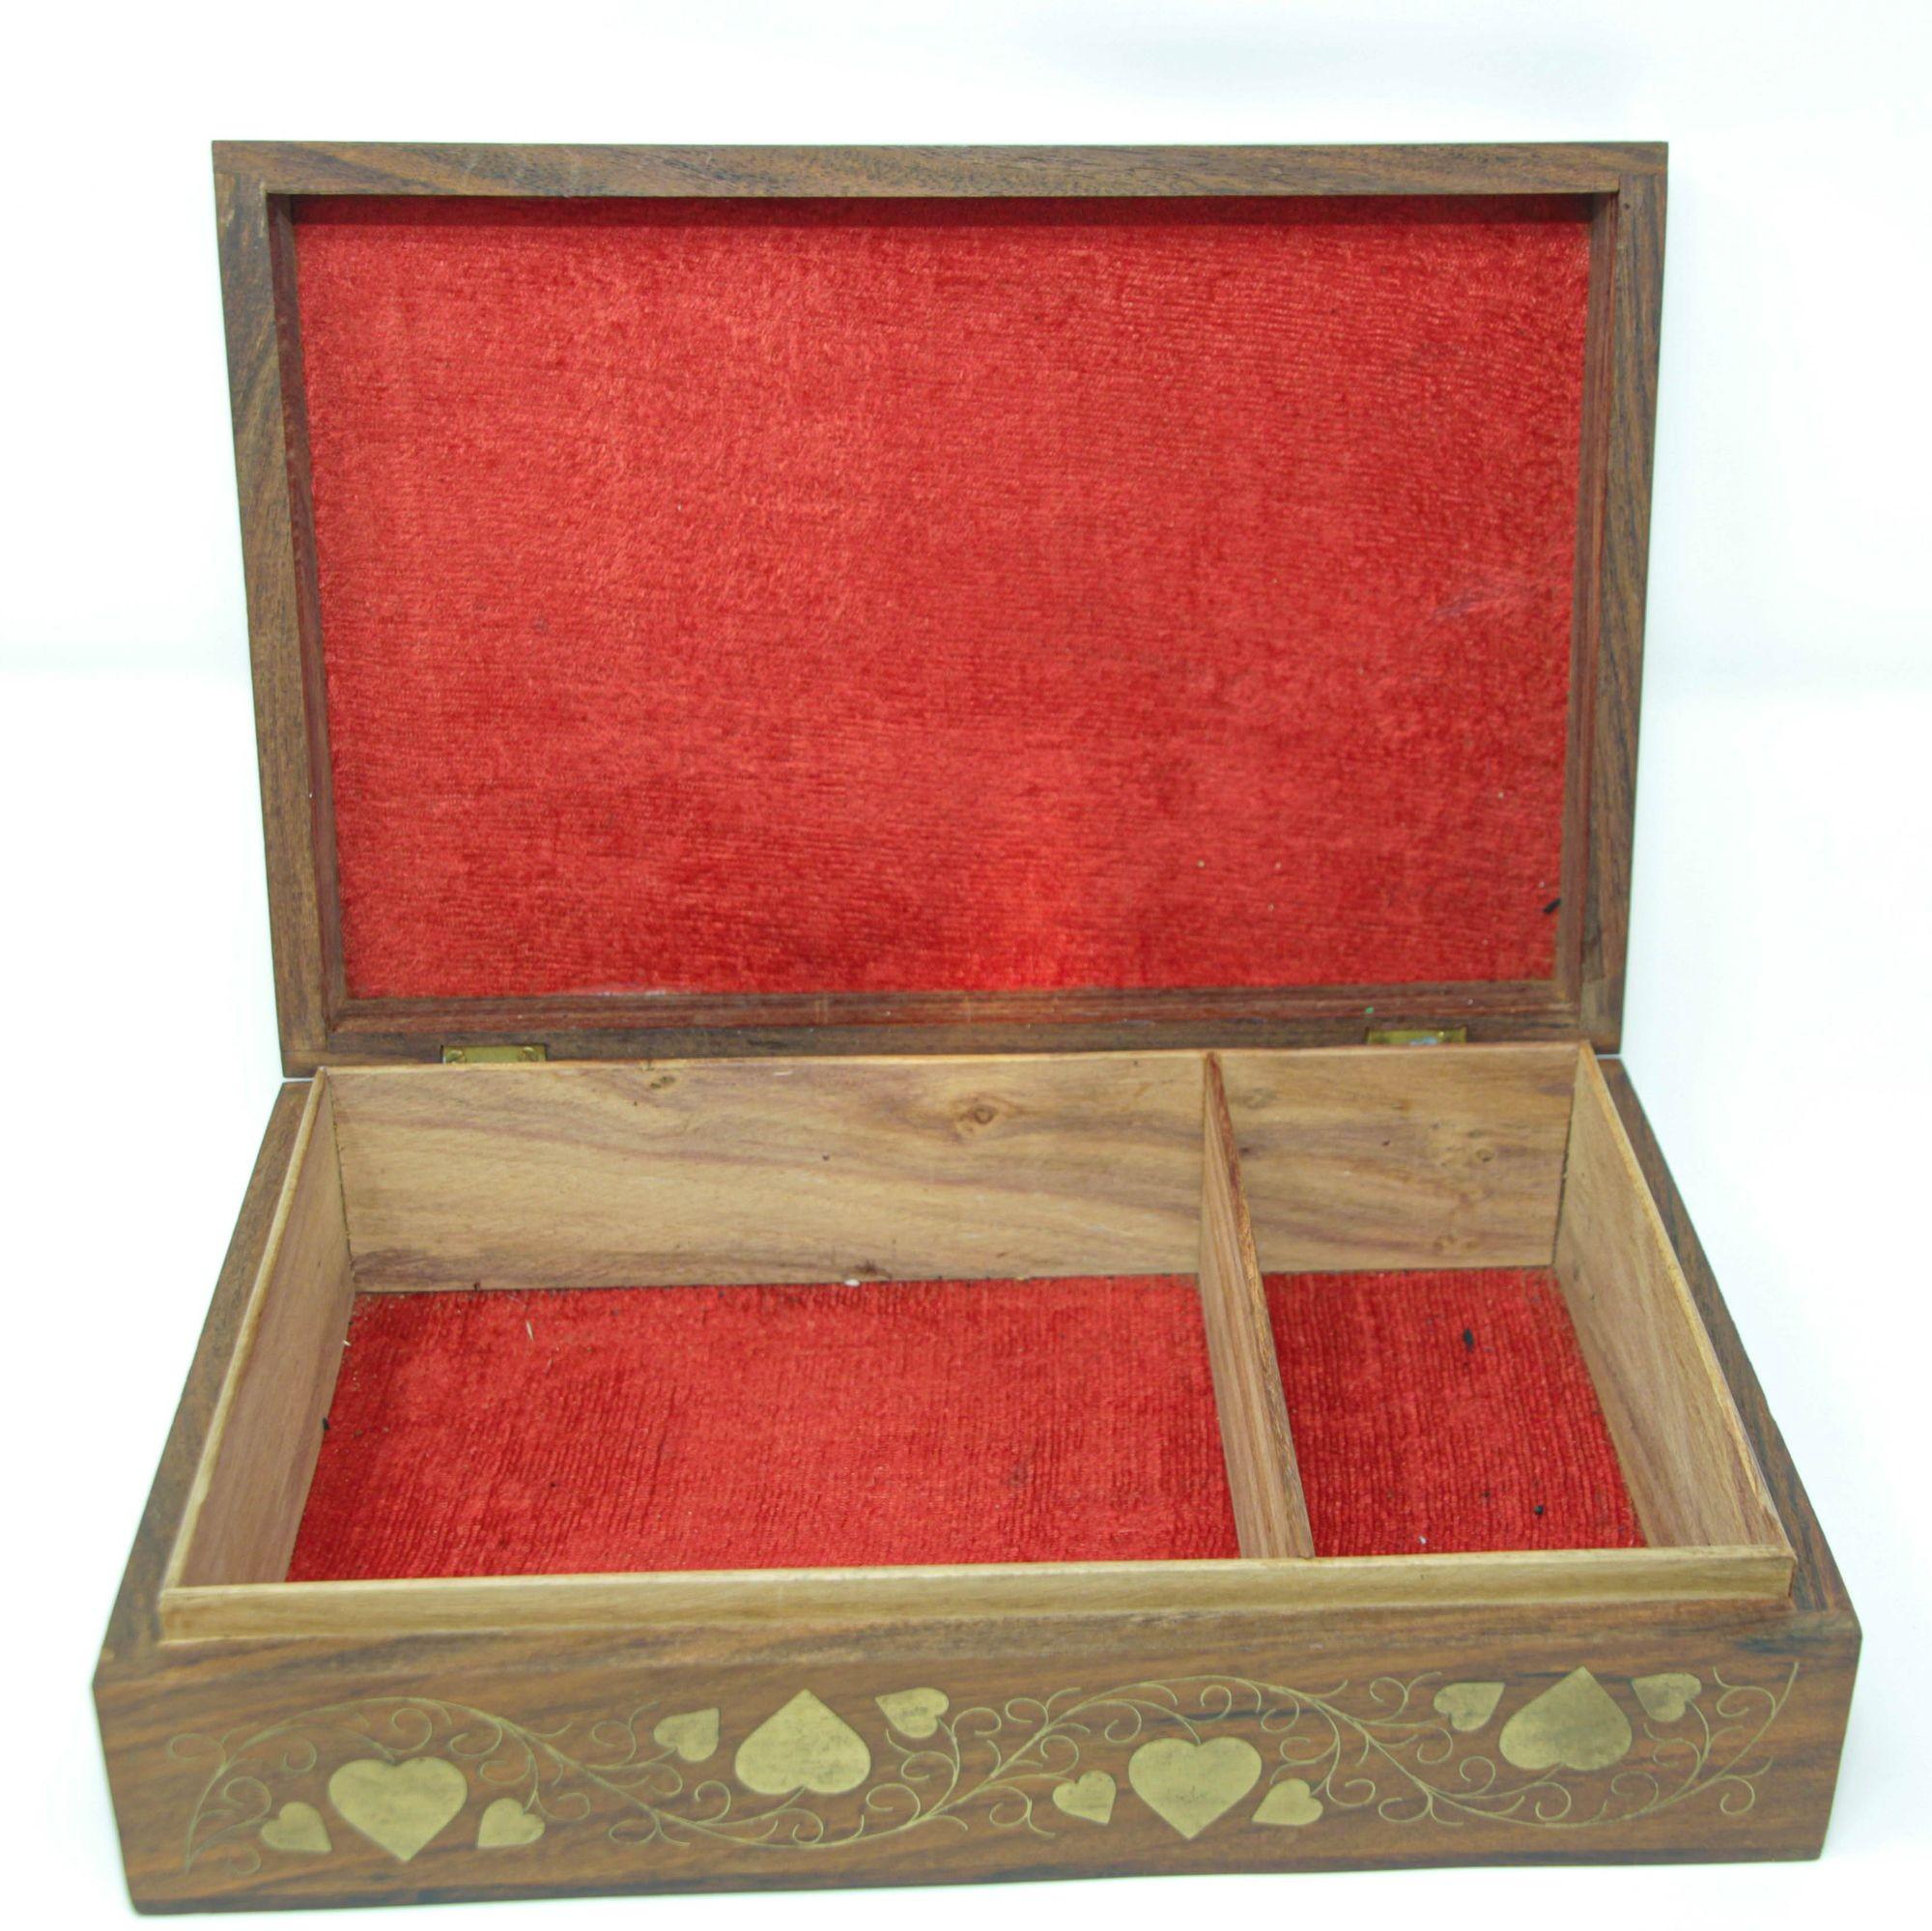 Anglo-Indian Anglo Indian Colonial Brass Inlaid Teak Jewelry Box For Sale